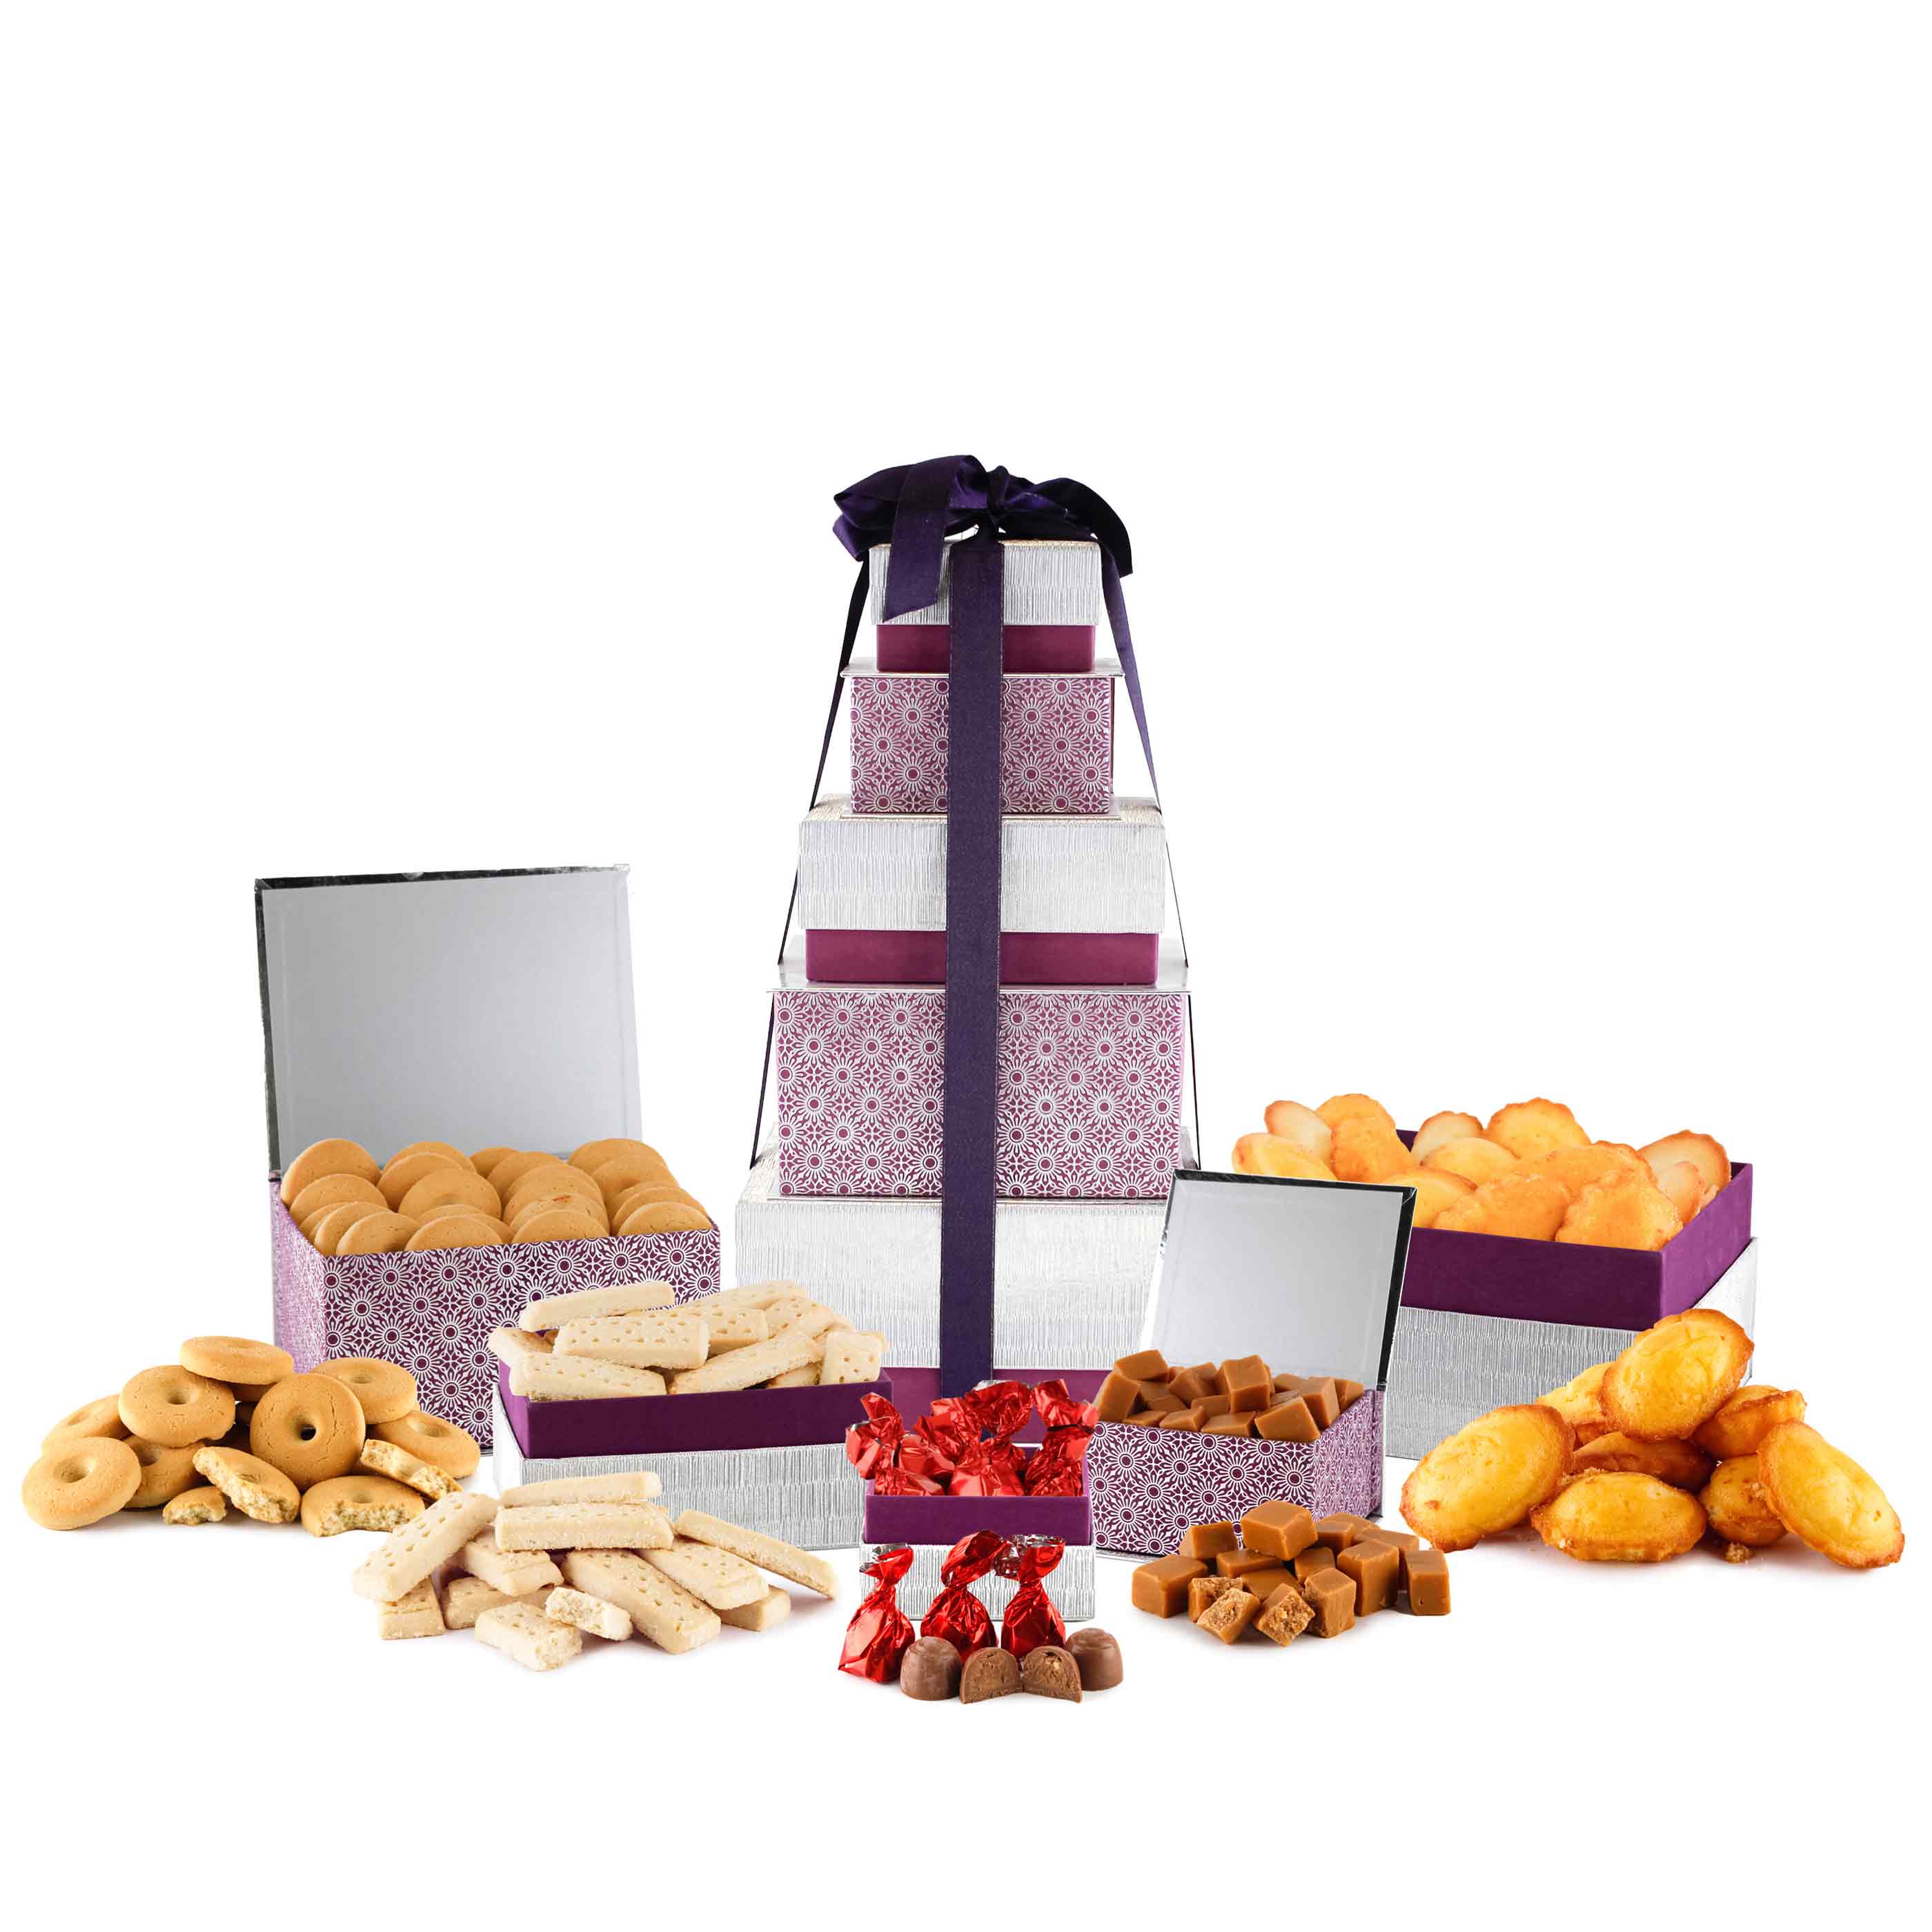 Purple and Sliver boxes shaped in a stacked tower, tied with a bow. Food shown in boxes